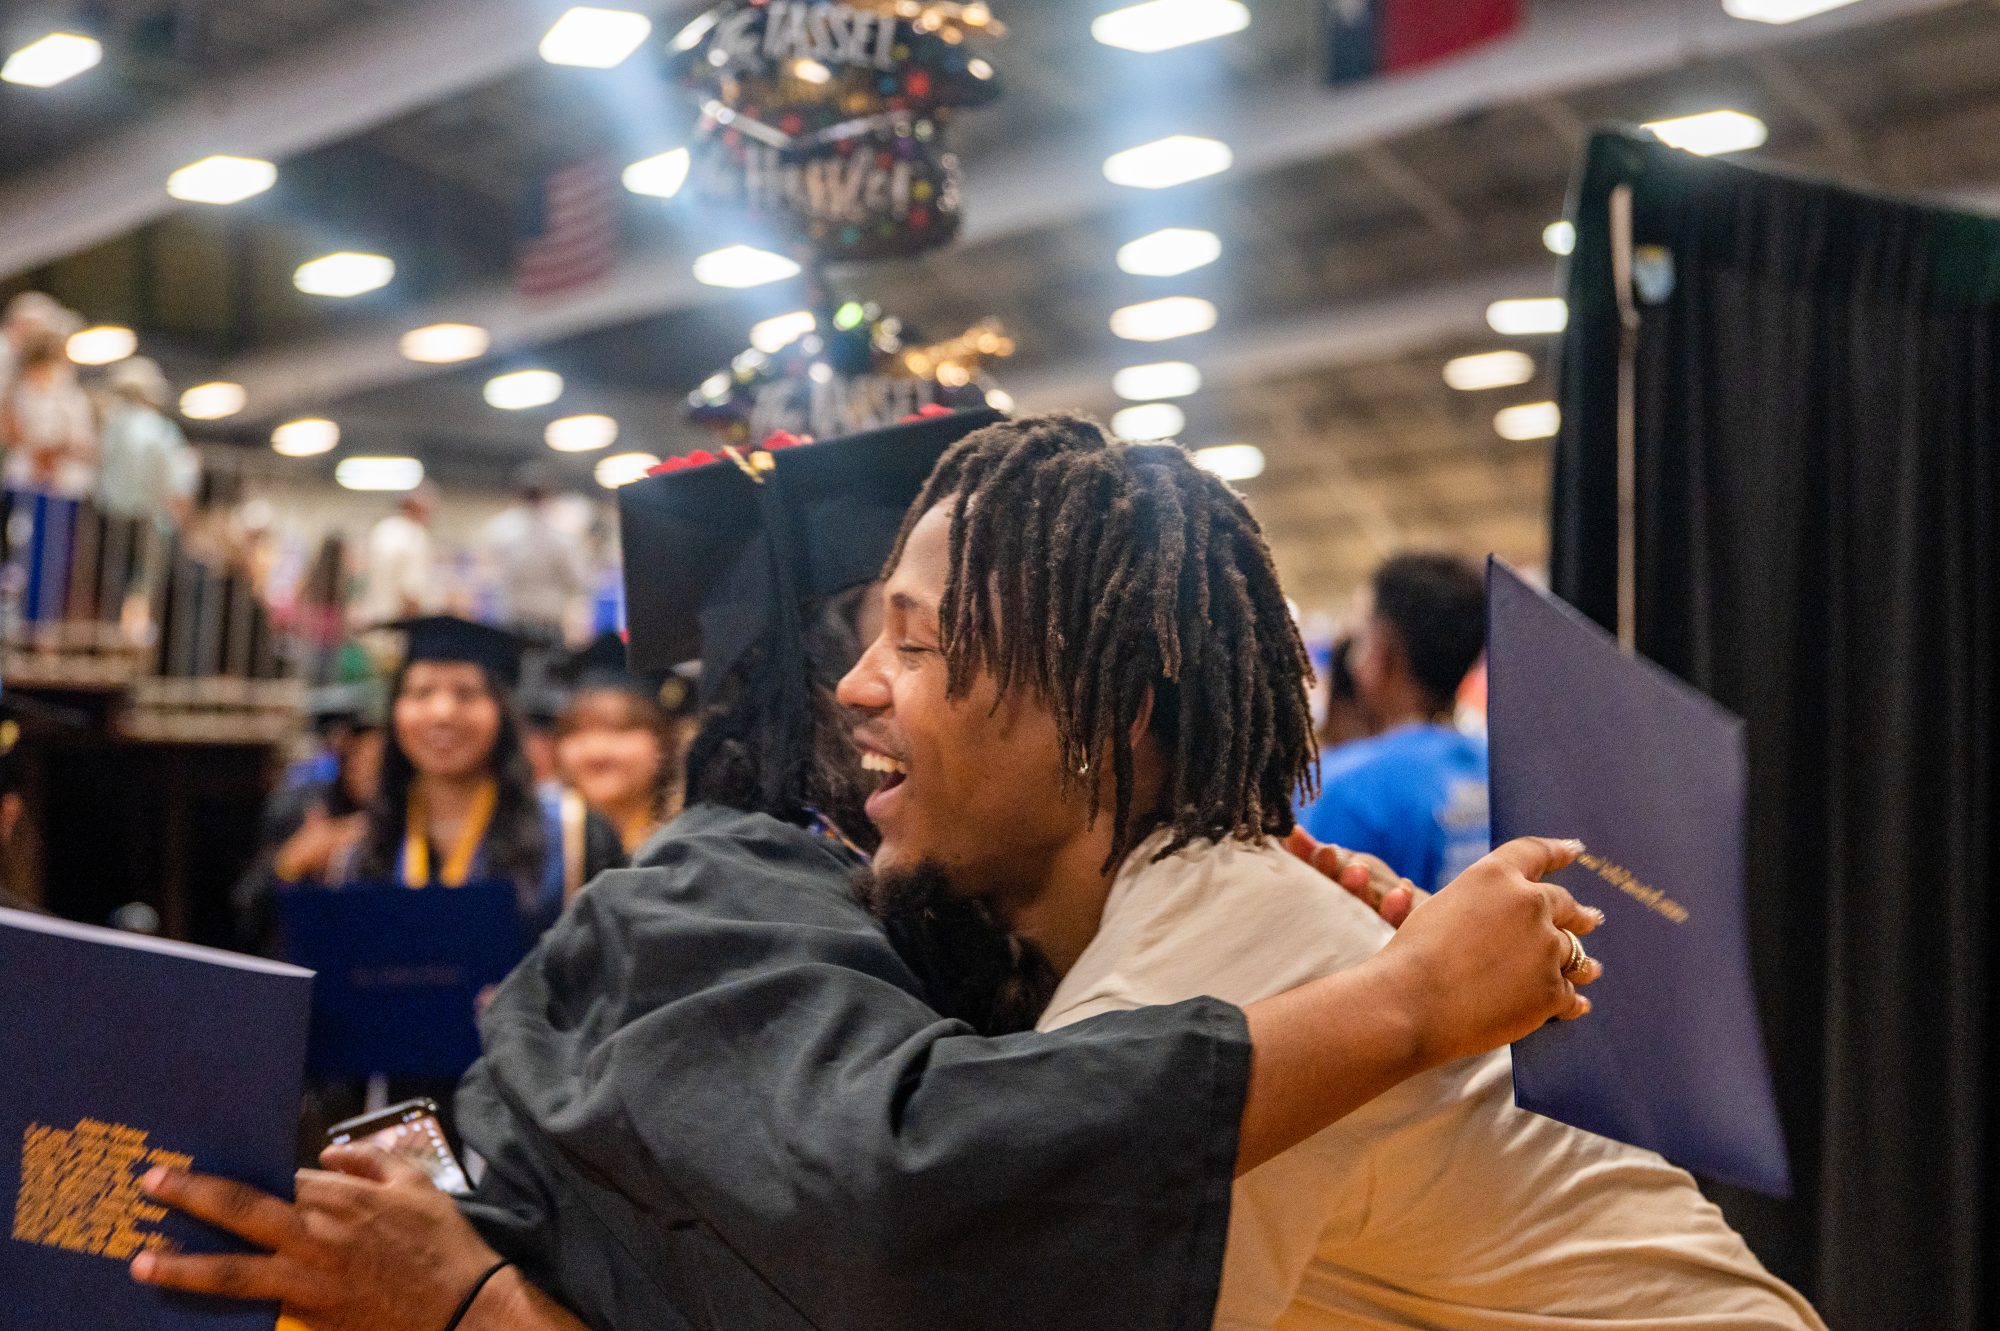 A student graduating and being hug by someone they know.